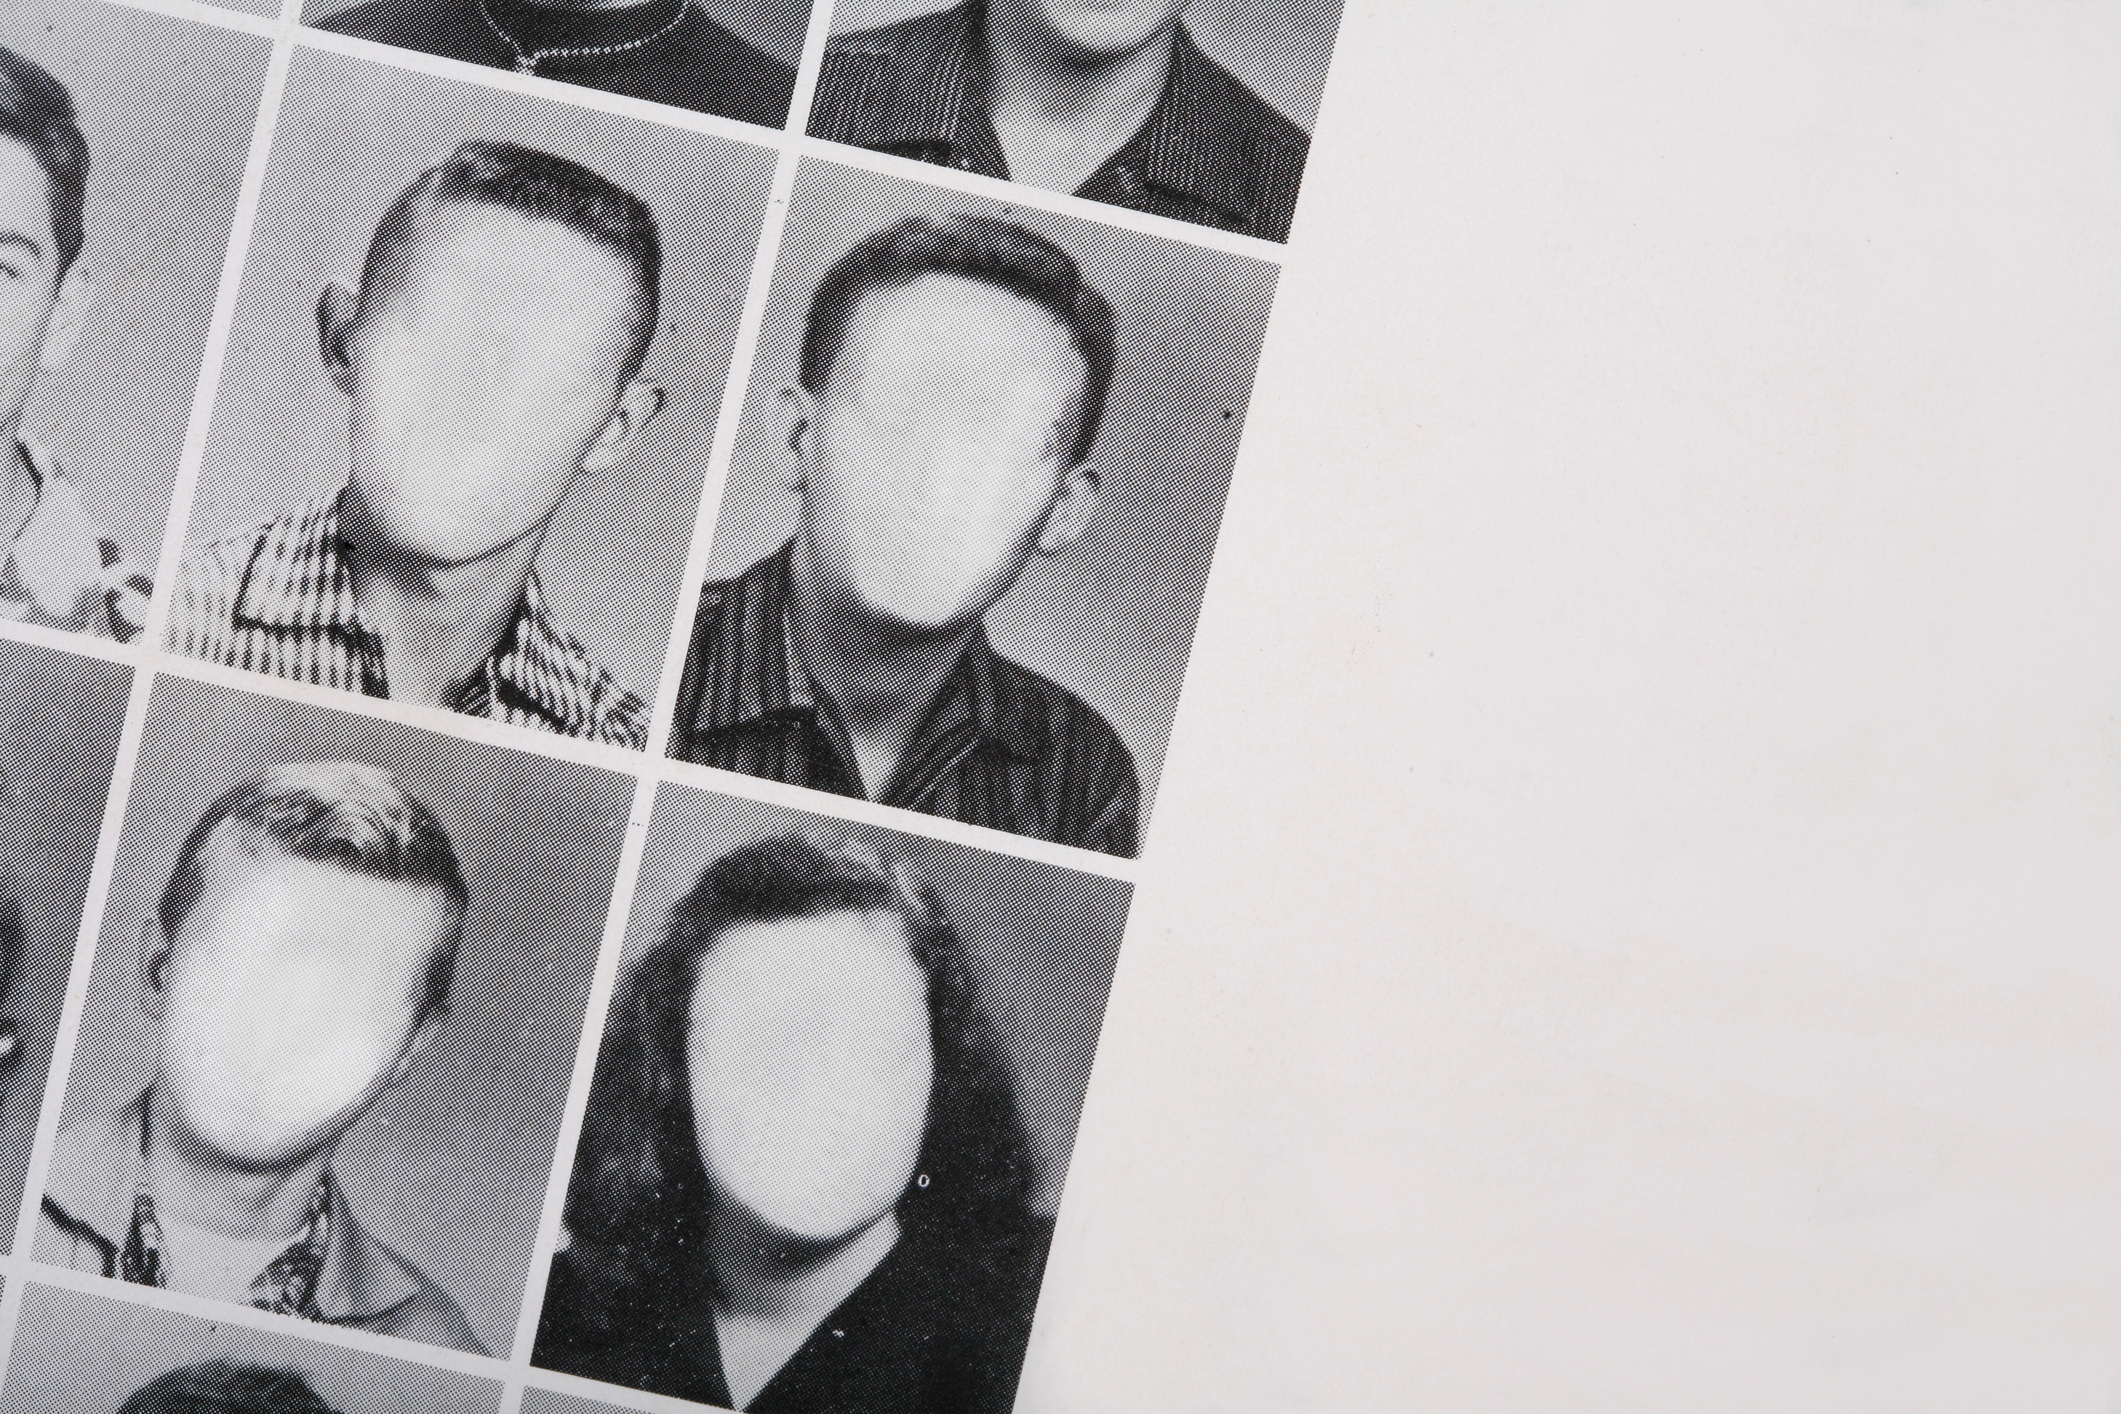 A yearbook with all the faces blurred out